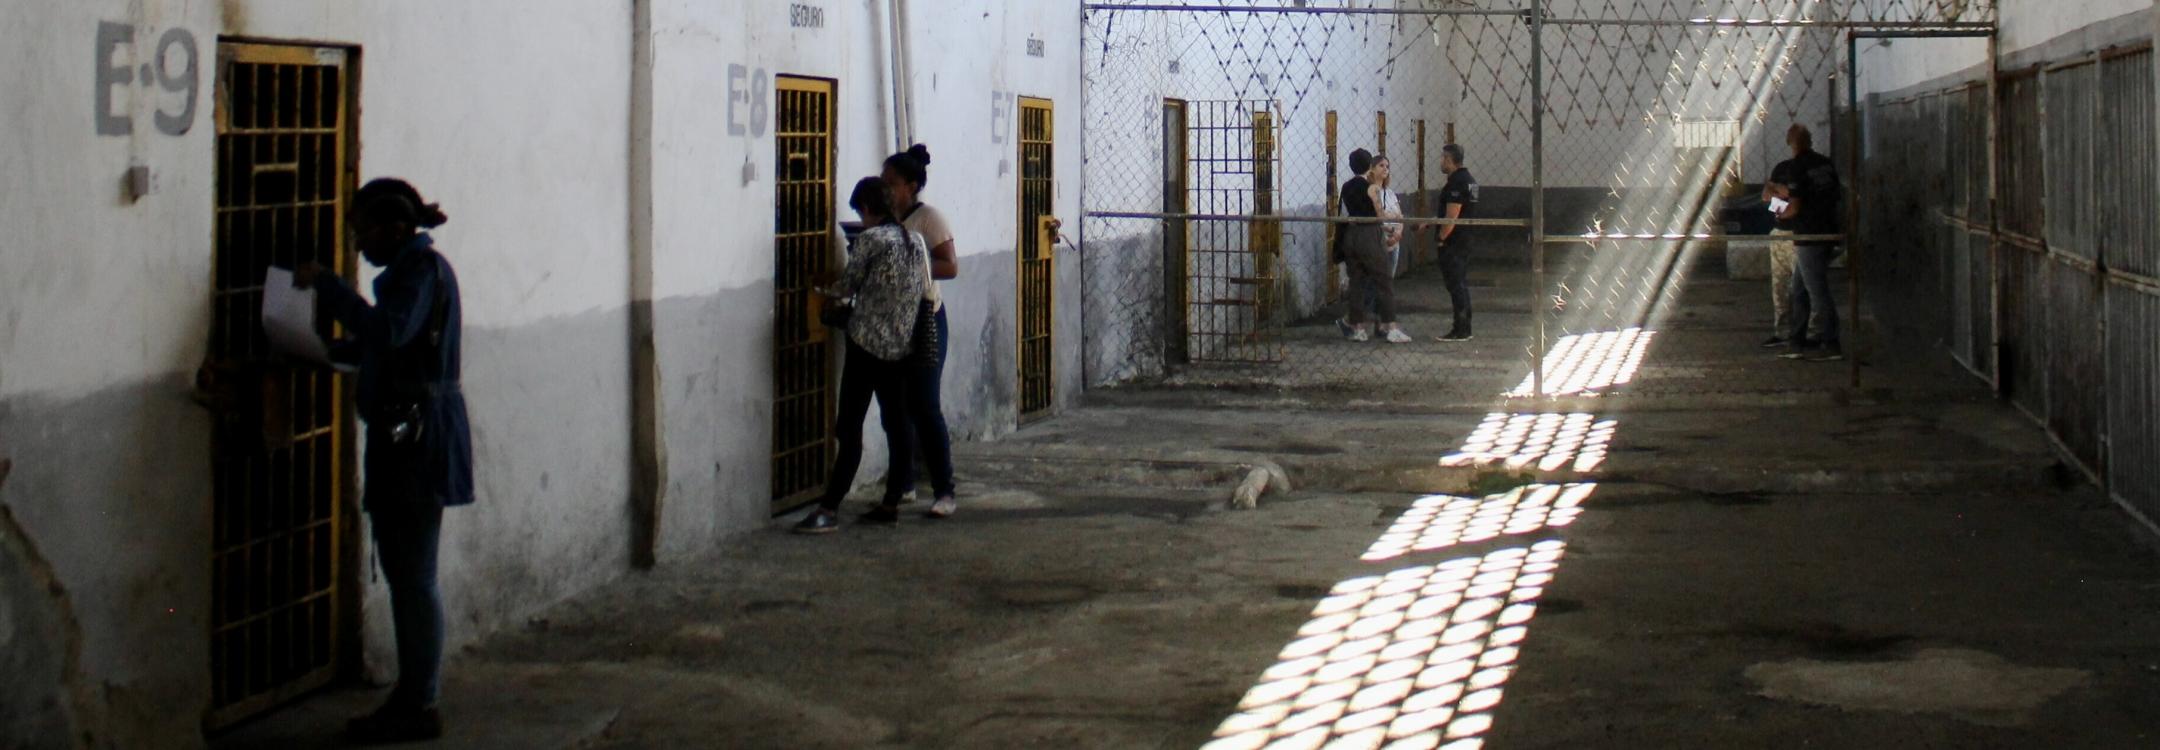 Family members visit detainees in a prison in Brazil